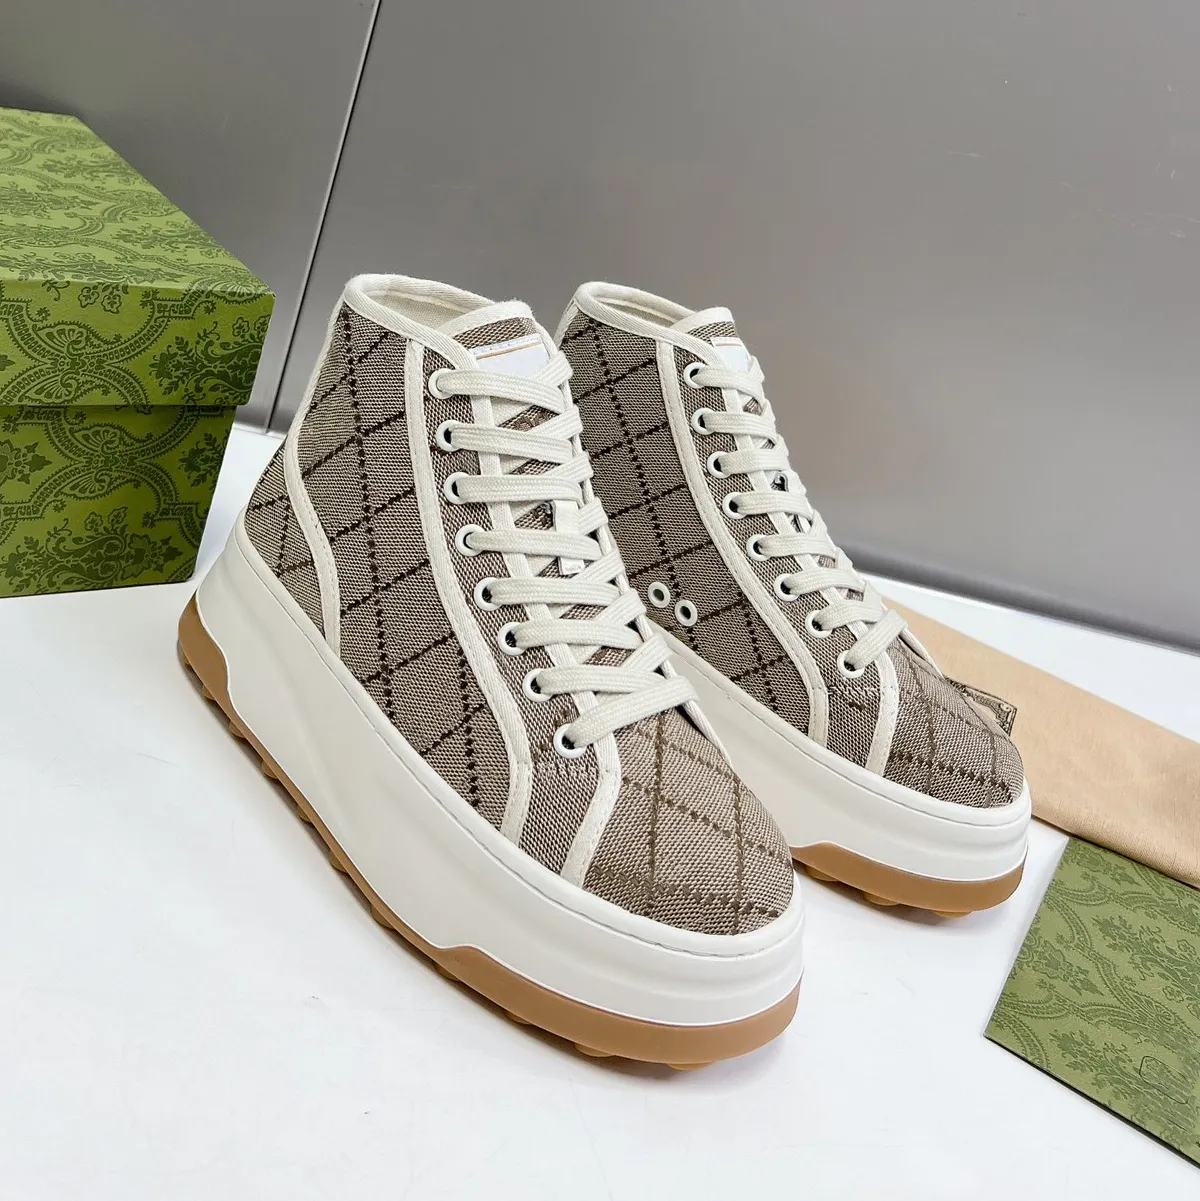 Designer Women Man Casual Shoes Italy Low-Cut 1977 High Top Letter High-Quality Sneaker Beige Ebony Canvas Tennis Shoe Luxury Fabric Tri 1249